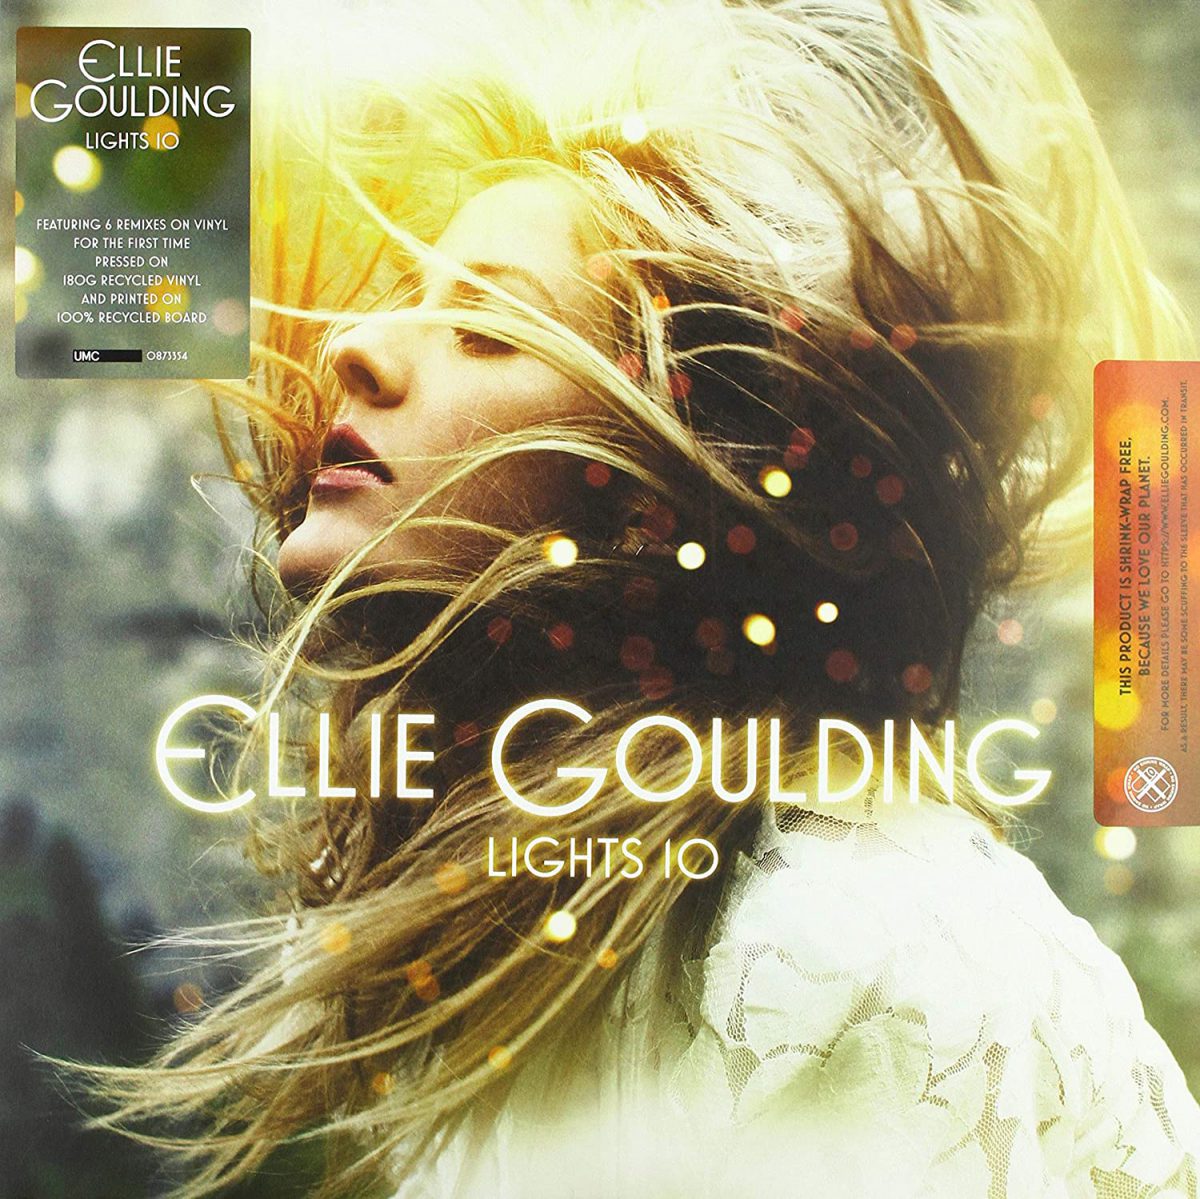 Ellie Goulding – Lights 10 – to be Featured on The Inner Groove